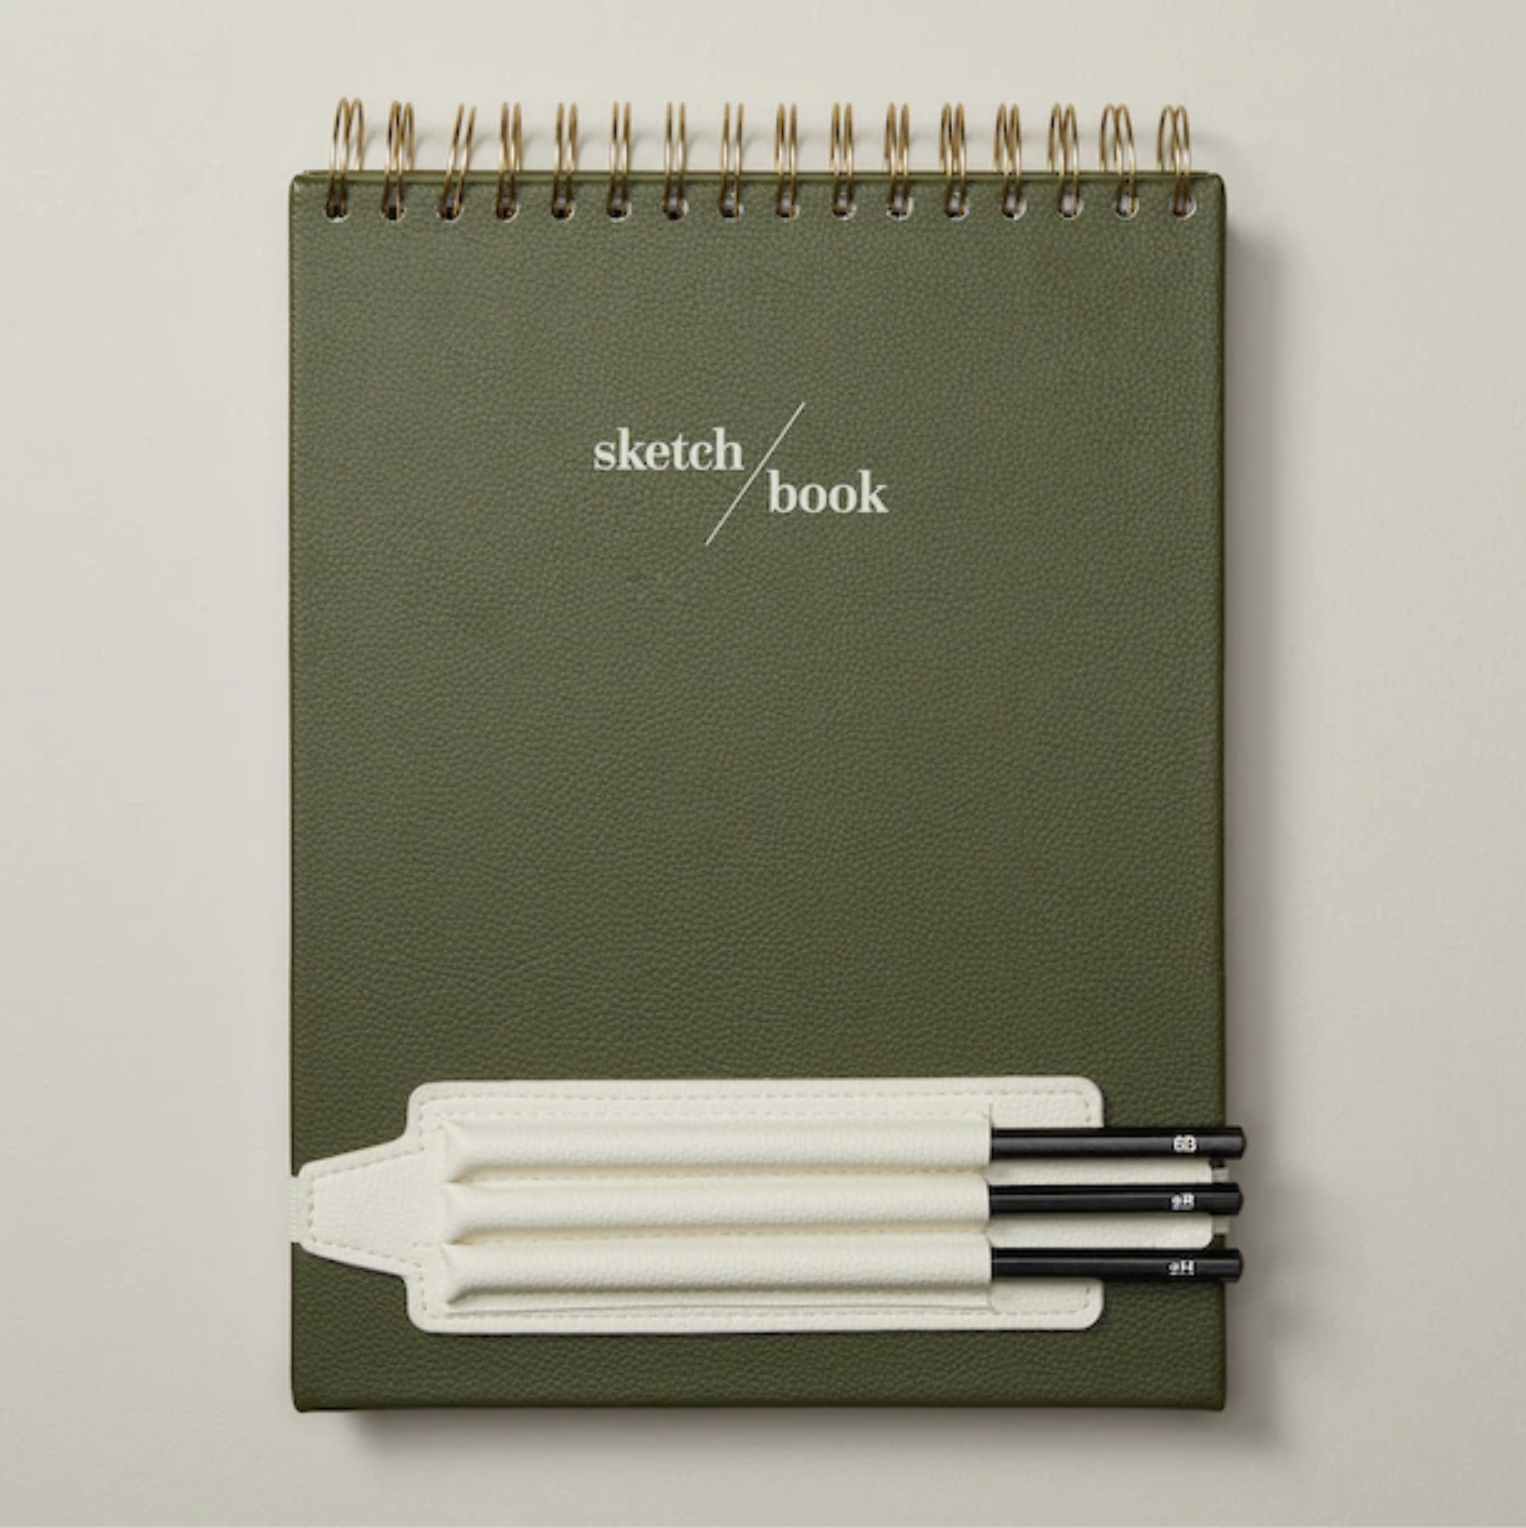 The sketchbook on a blank background